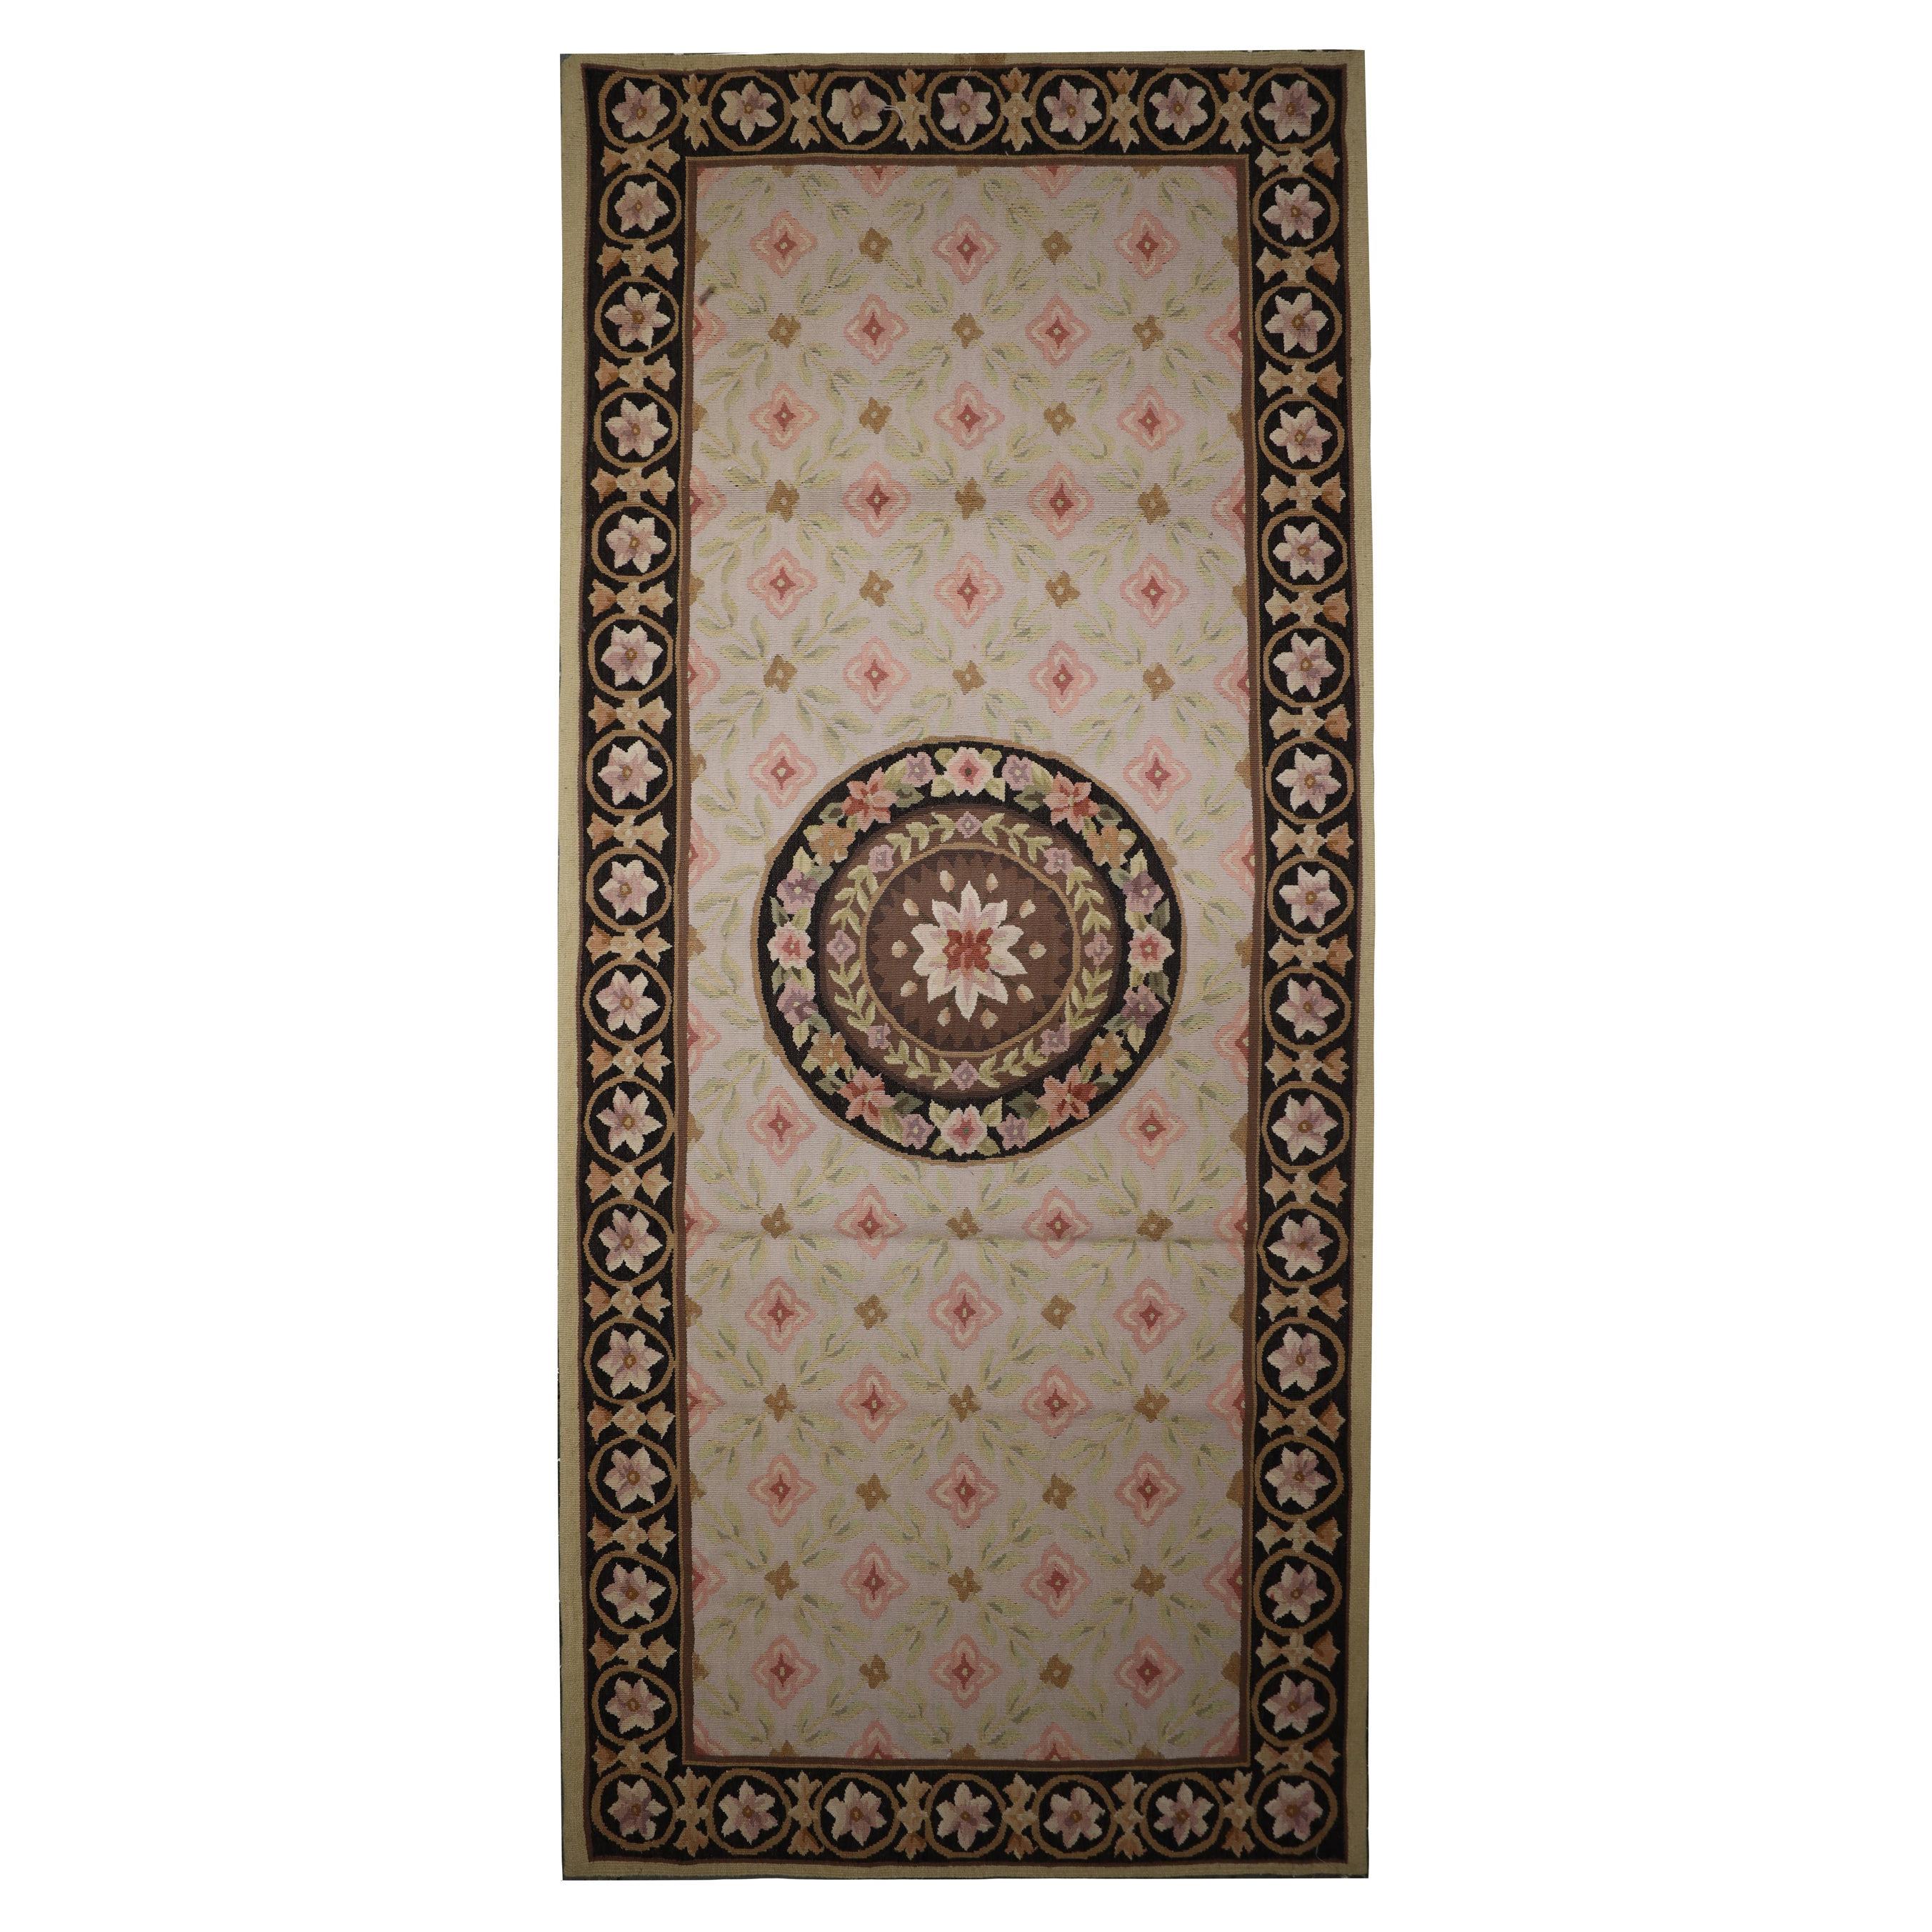 Small Wool Needlepoint Runner Rug Handwoven Traditional Floral Area Rug For Sale